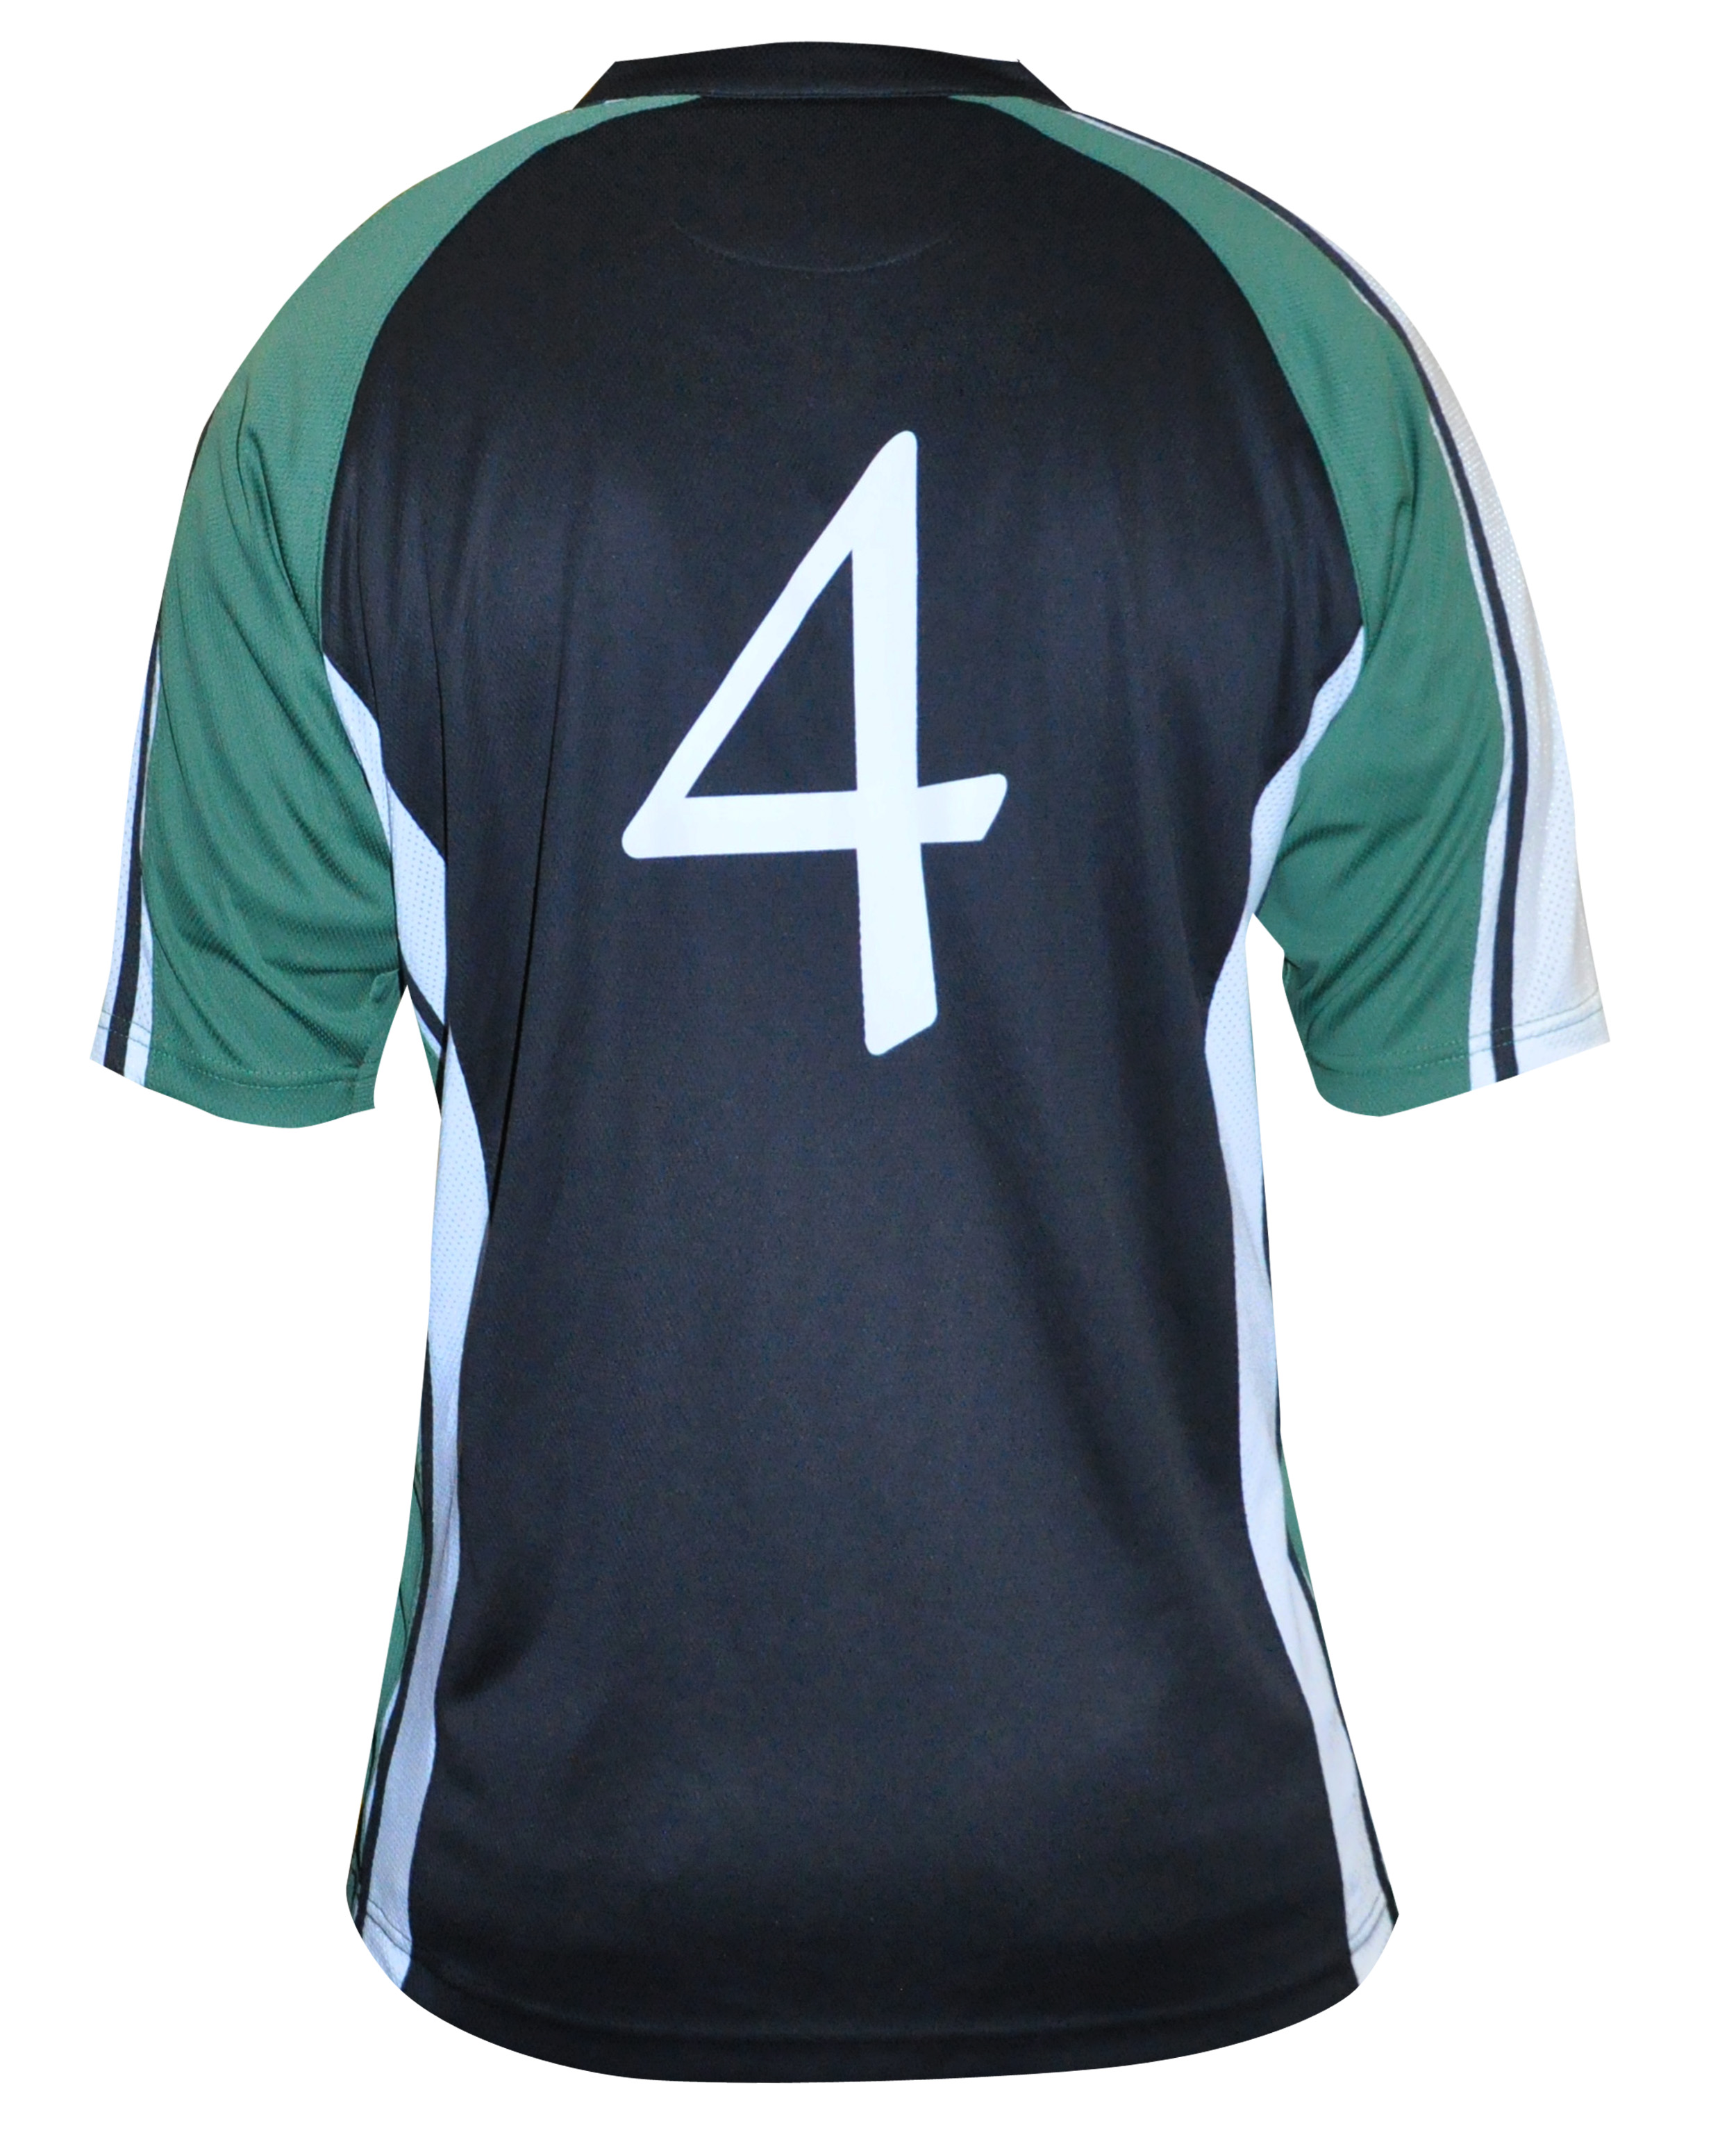 Product image for Irish Shirt | Green & Navy Performance Ireland Rugby Jersey